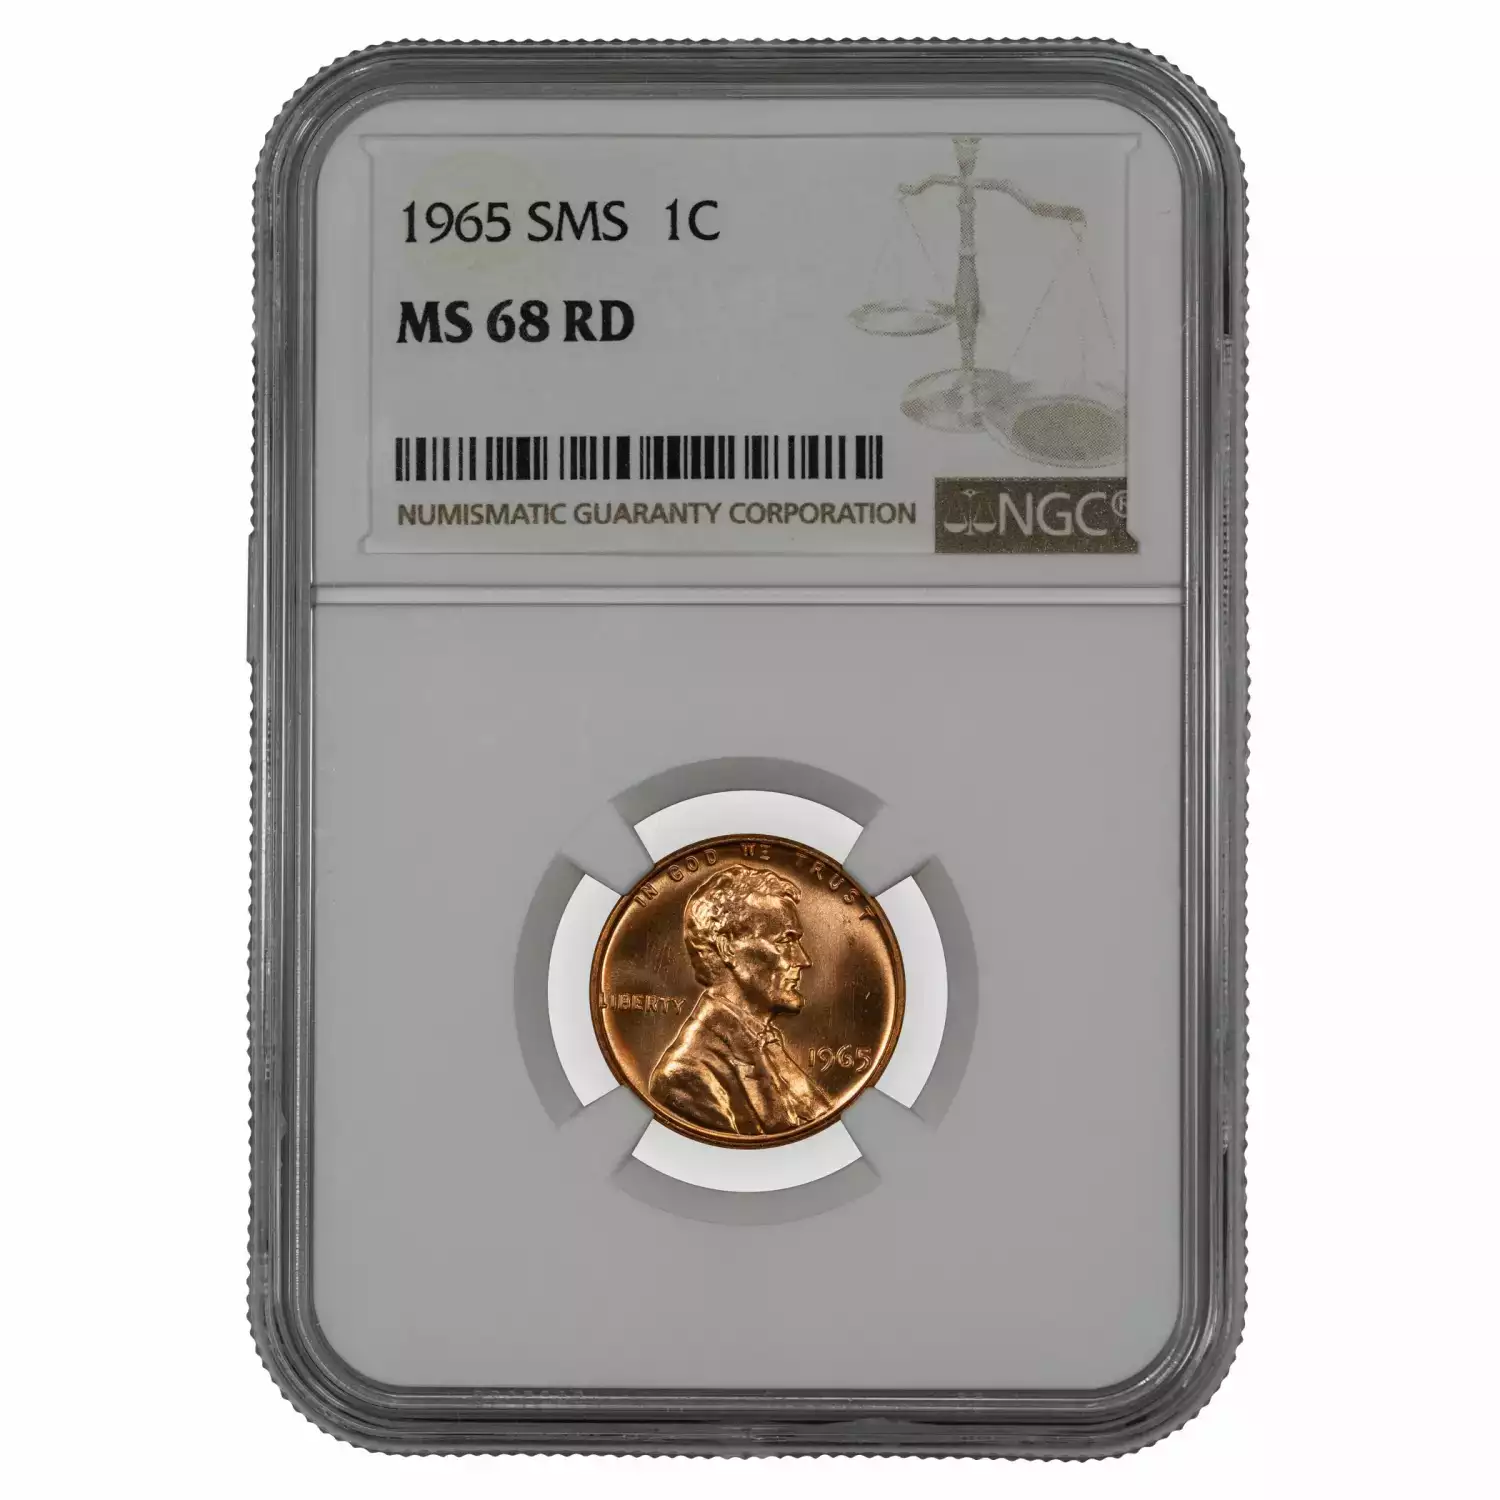 1965 SMS LINCOLN MEMORIAL CENT PENNY 1C NGC CERTIFIED MS 68 RD